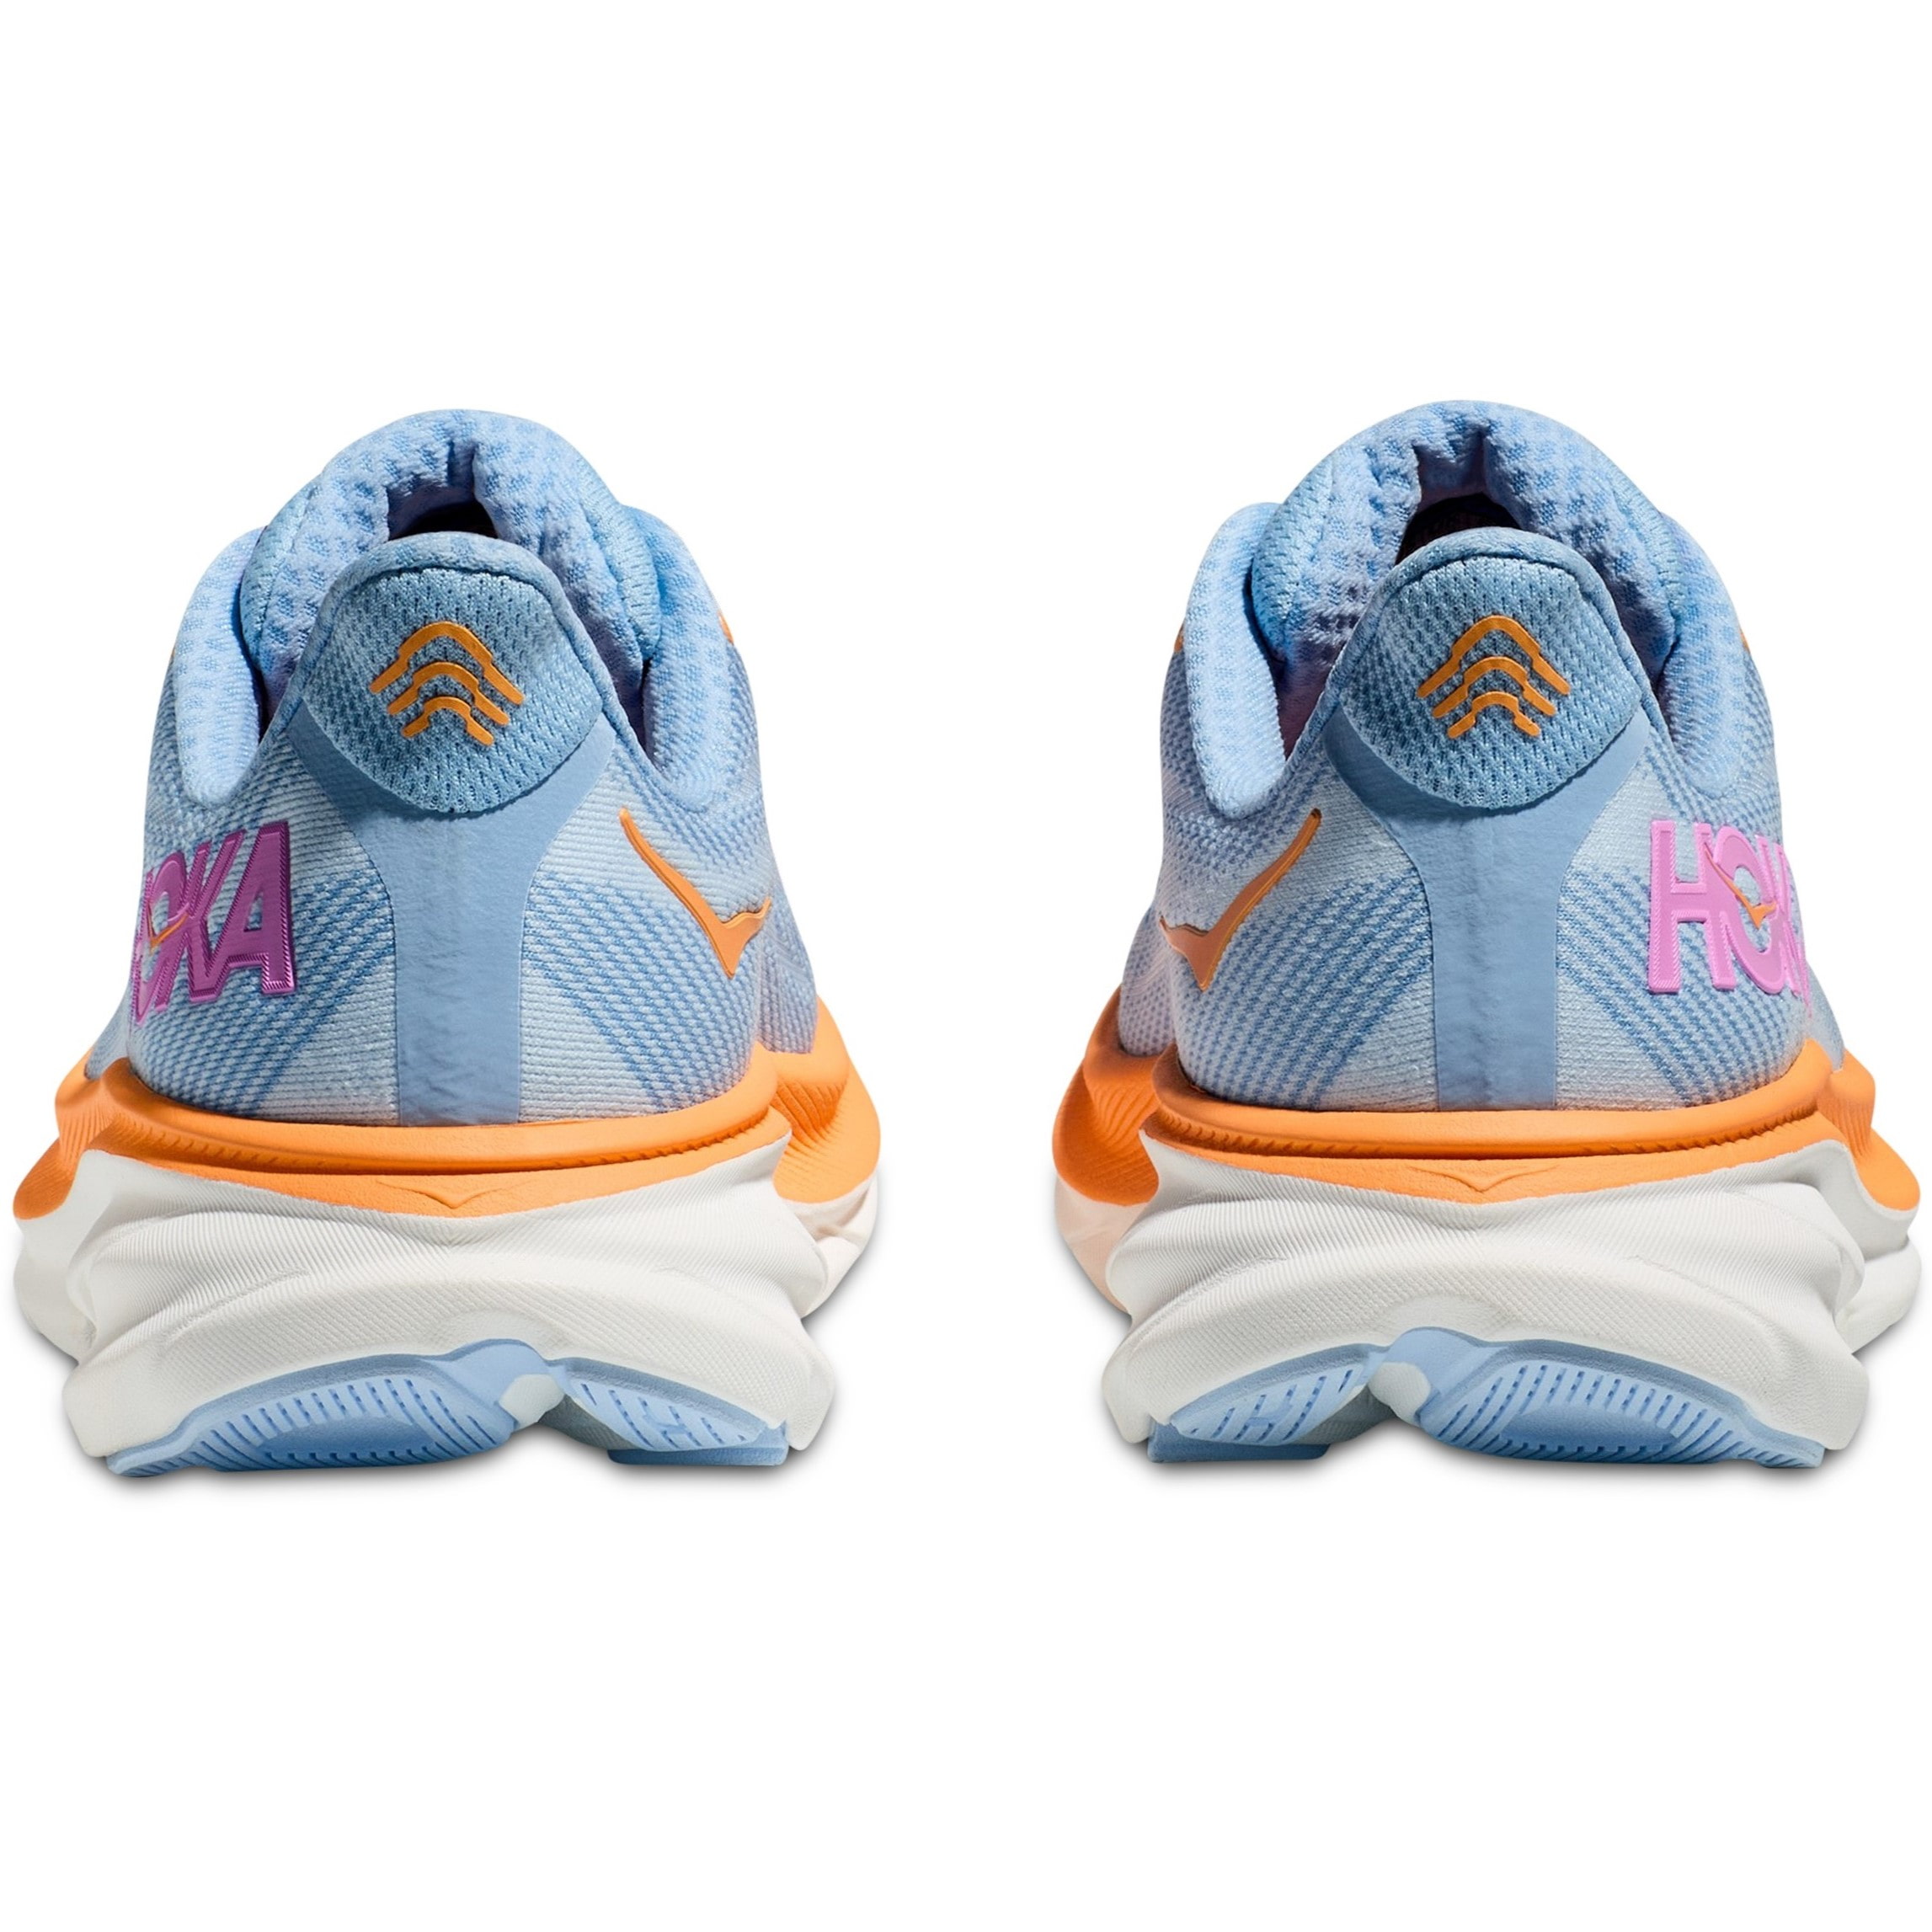 GIÀY HOKA NỮ CLIFTON 9 AIRY BLUE ICE WATER WOMEN ROAD RUNNING SHOES 1127896-ABIW 10